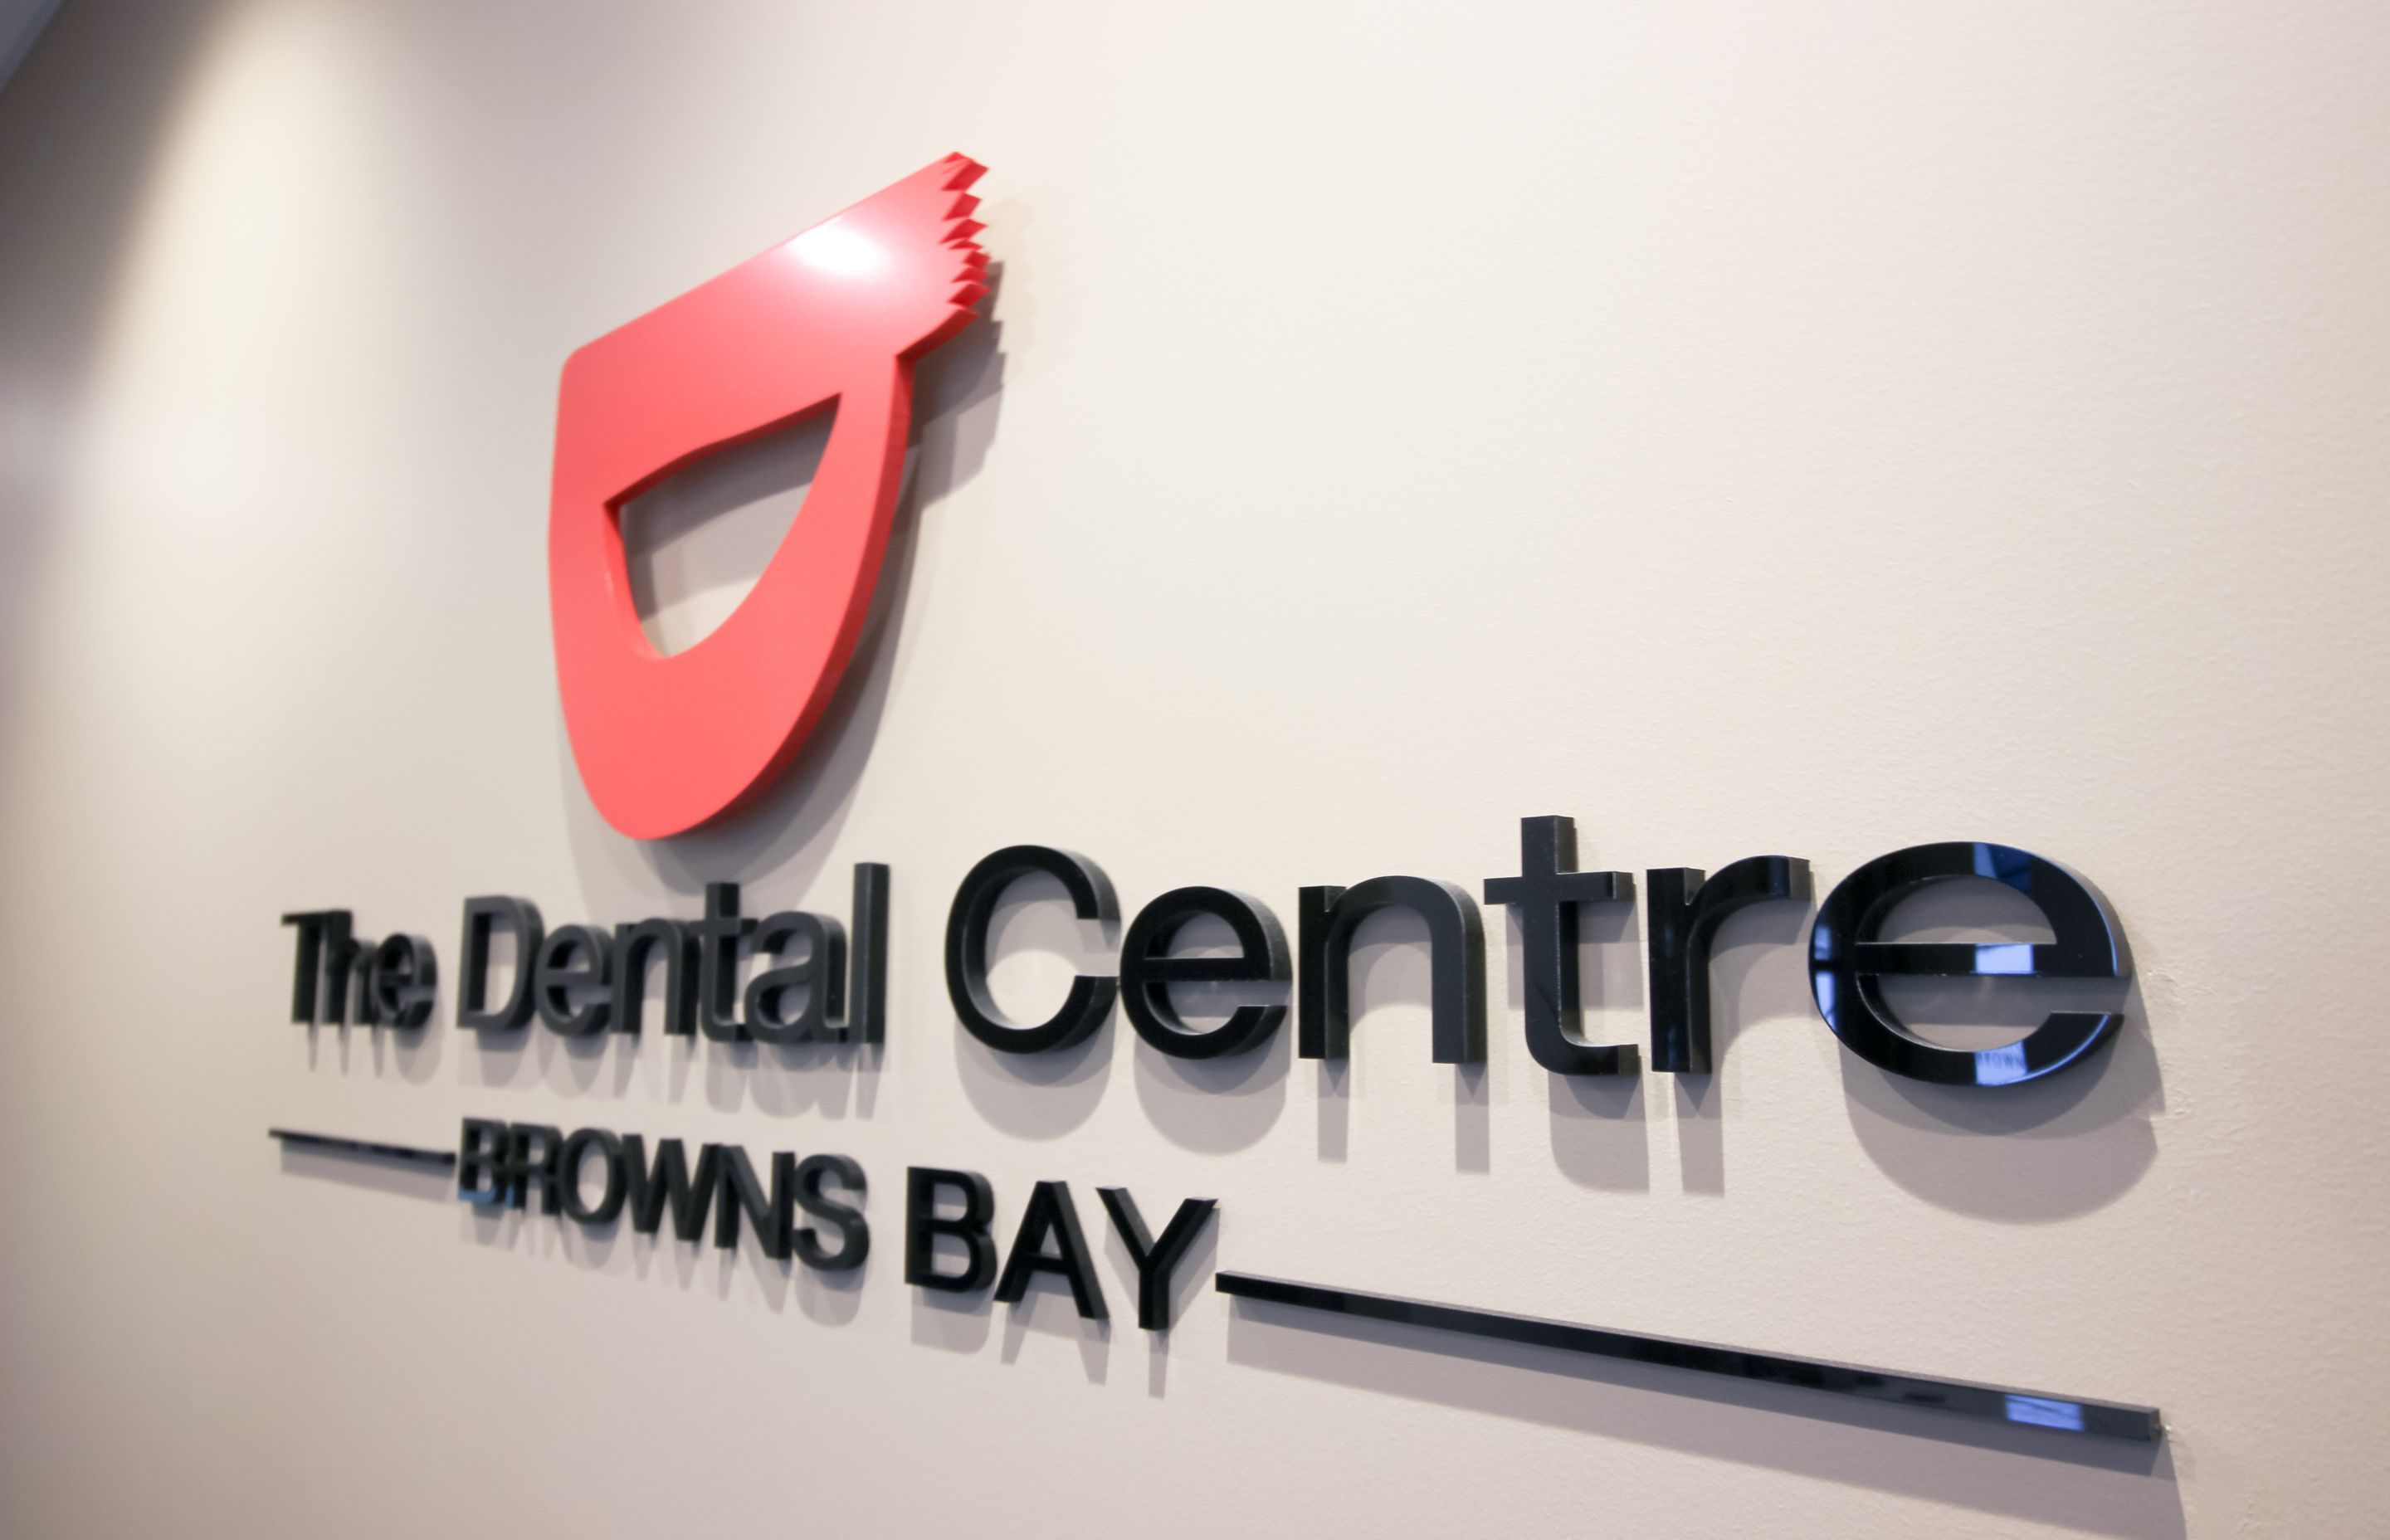 The Dental Centre (Browns Bay)